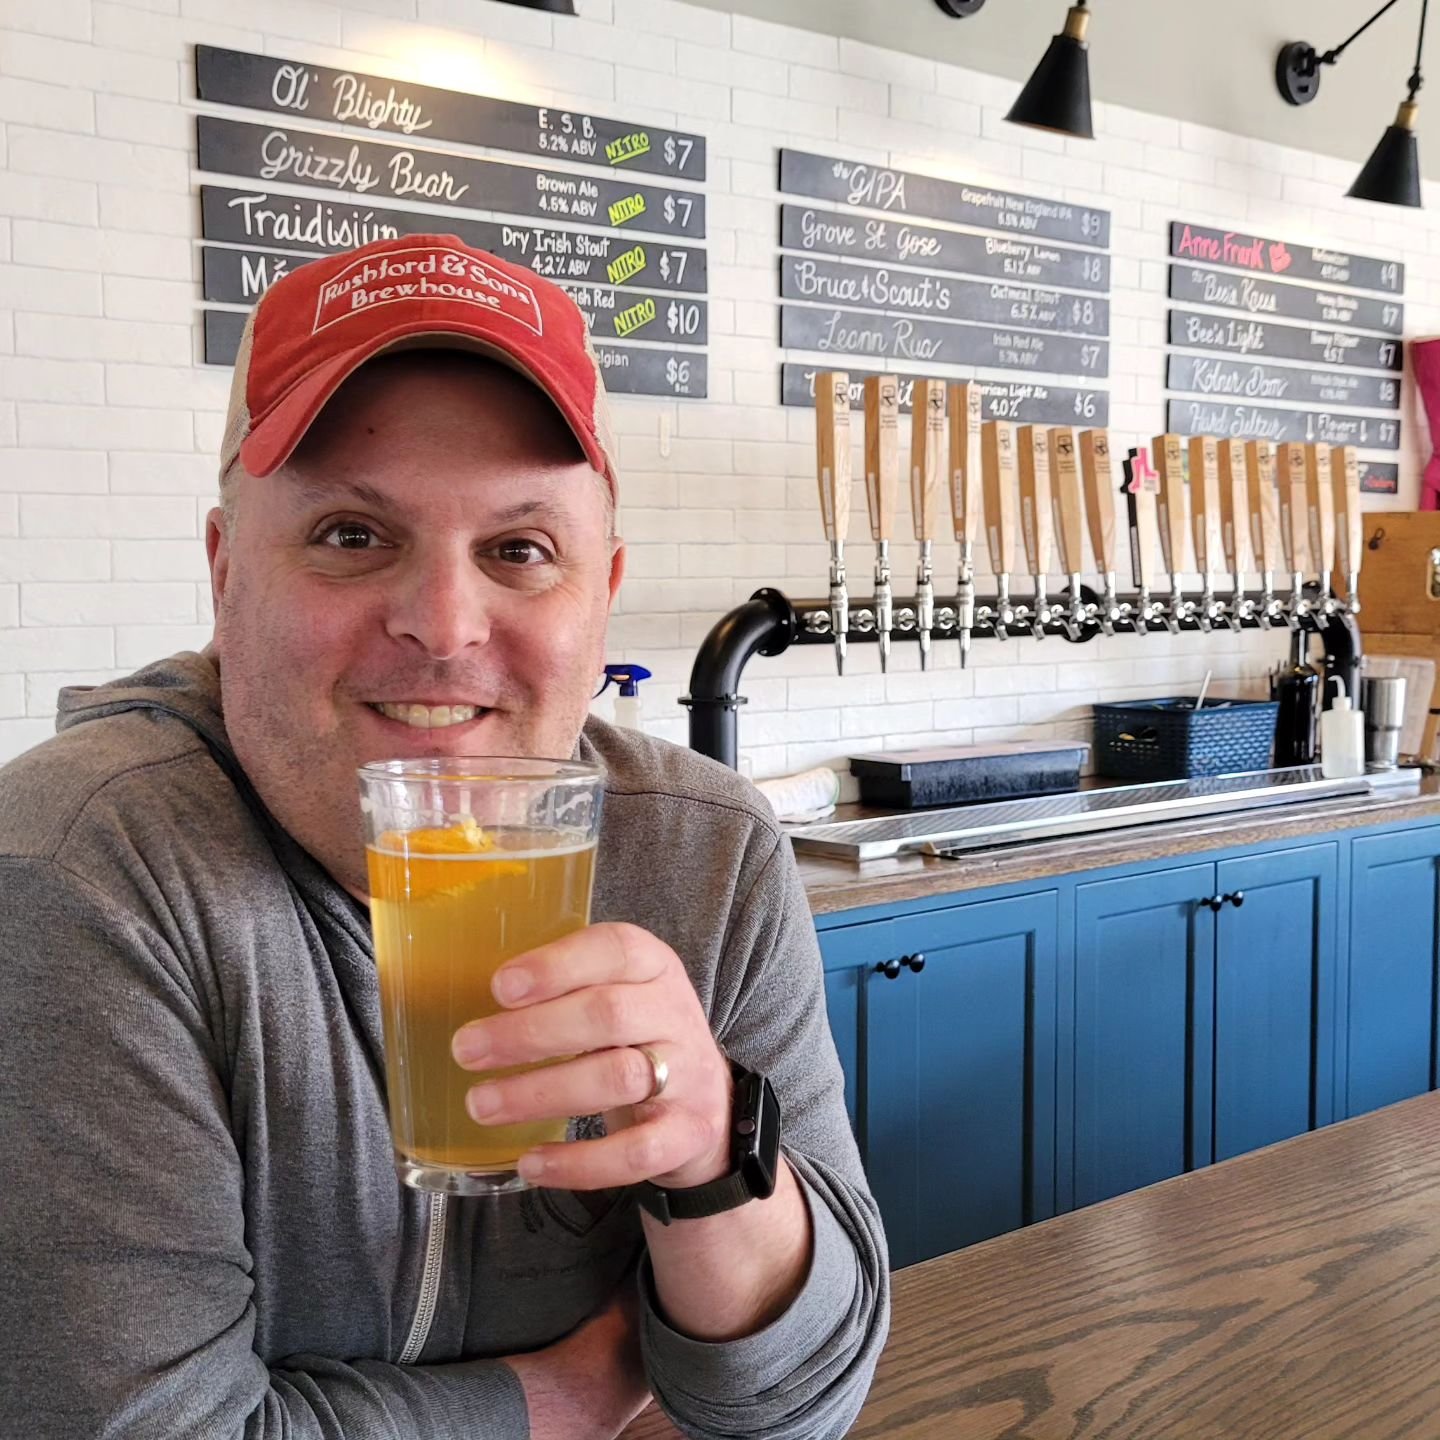 Come enjoy the nicer than expected weather with a fresh pint and this smile!

#rasbrewhouse #uptonma #centralma #centralmabeer #beer #brewery #nanobrewery #craftbrewery #craftbeer
#supportlocal #supportlocalbusiness #drinklocal #drinklocalbeer #dri